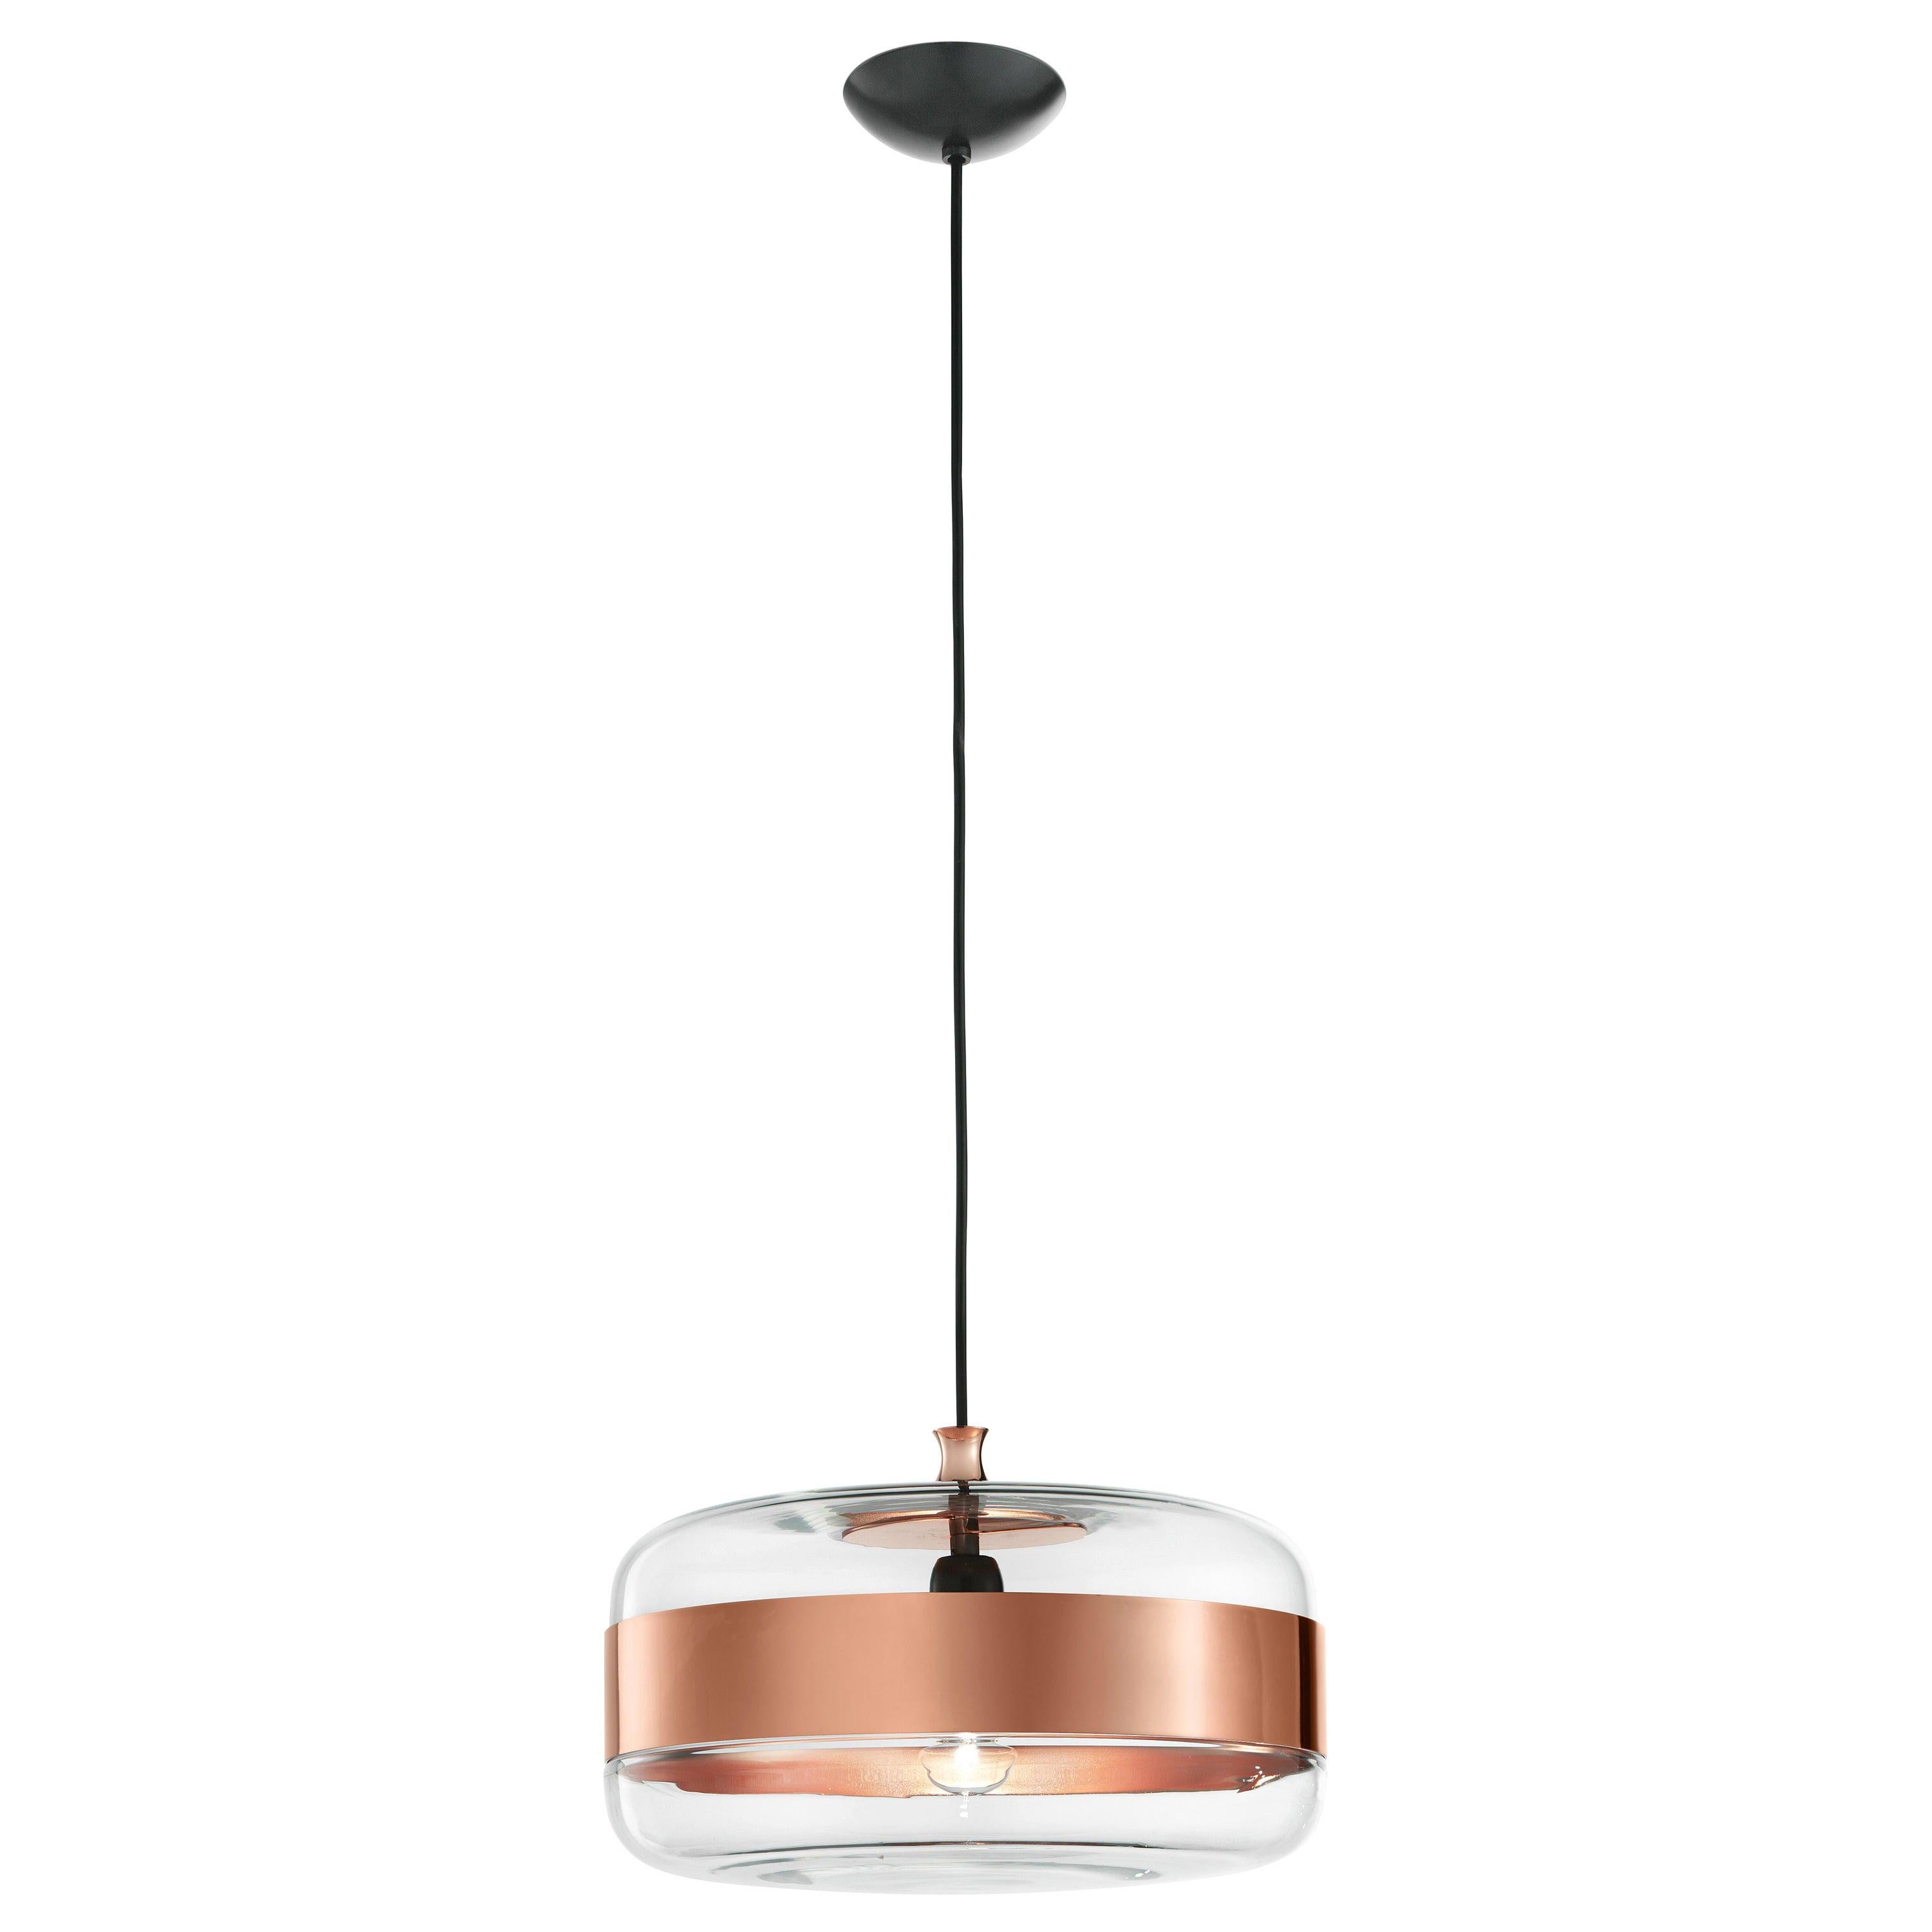 Vistosi Futura SPG Pendant Light in Crystal and Copper by Hangar Design Group